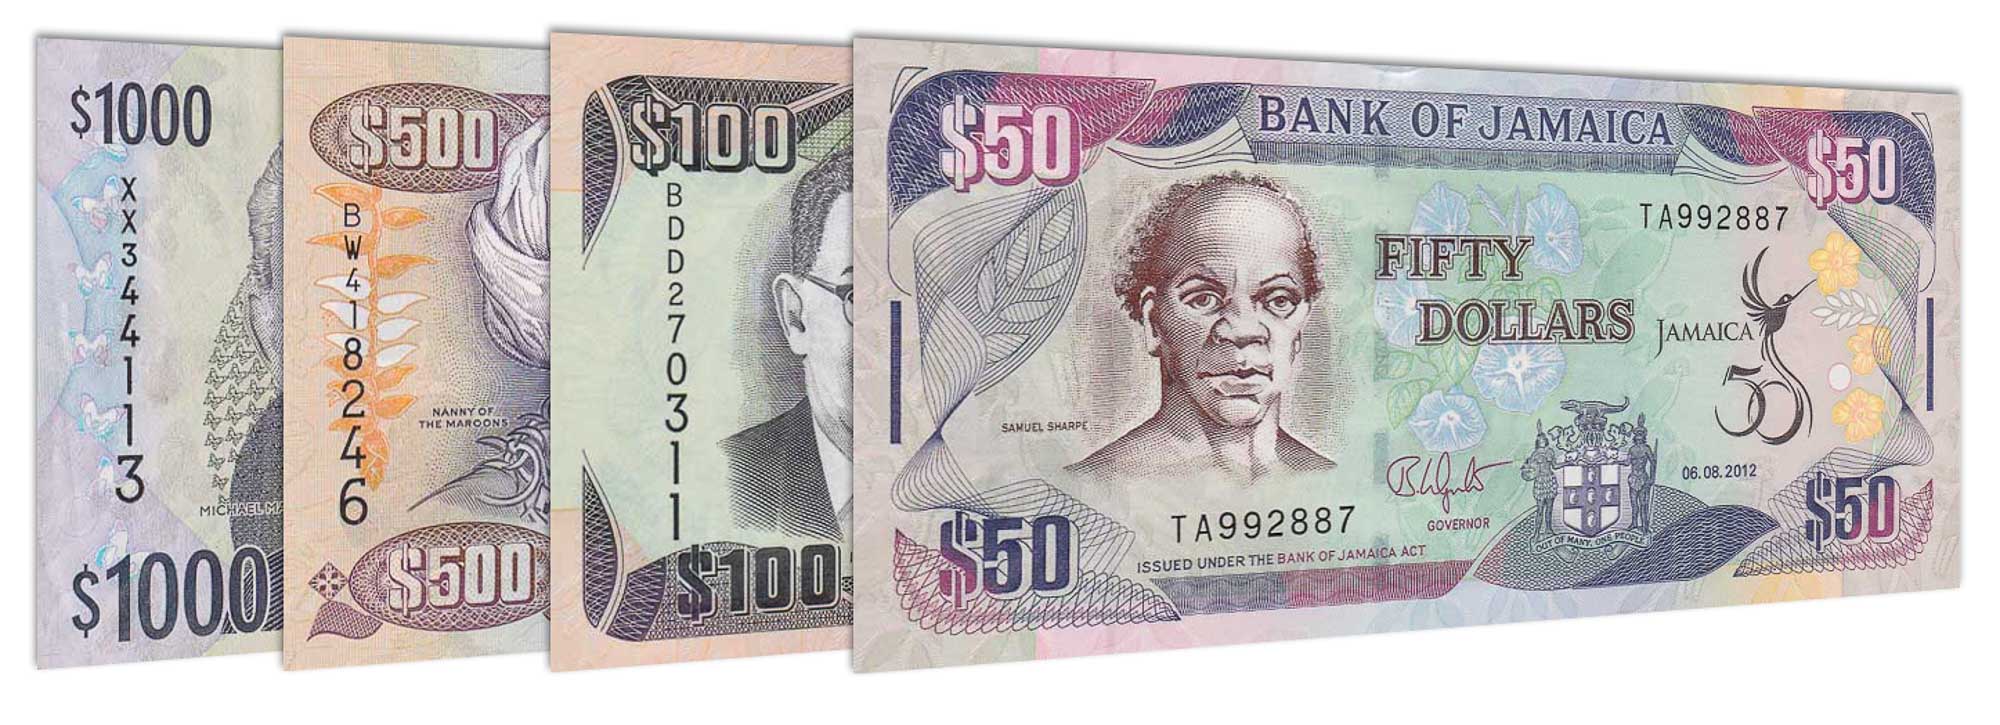 currency converter usd to jamaican dollar